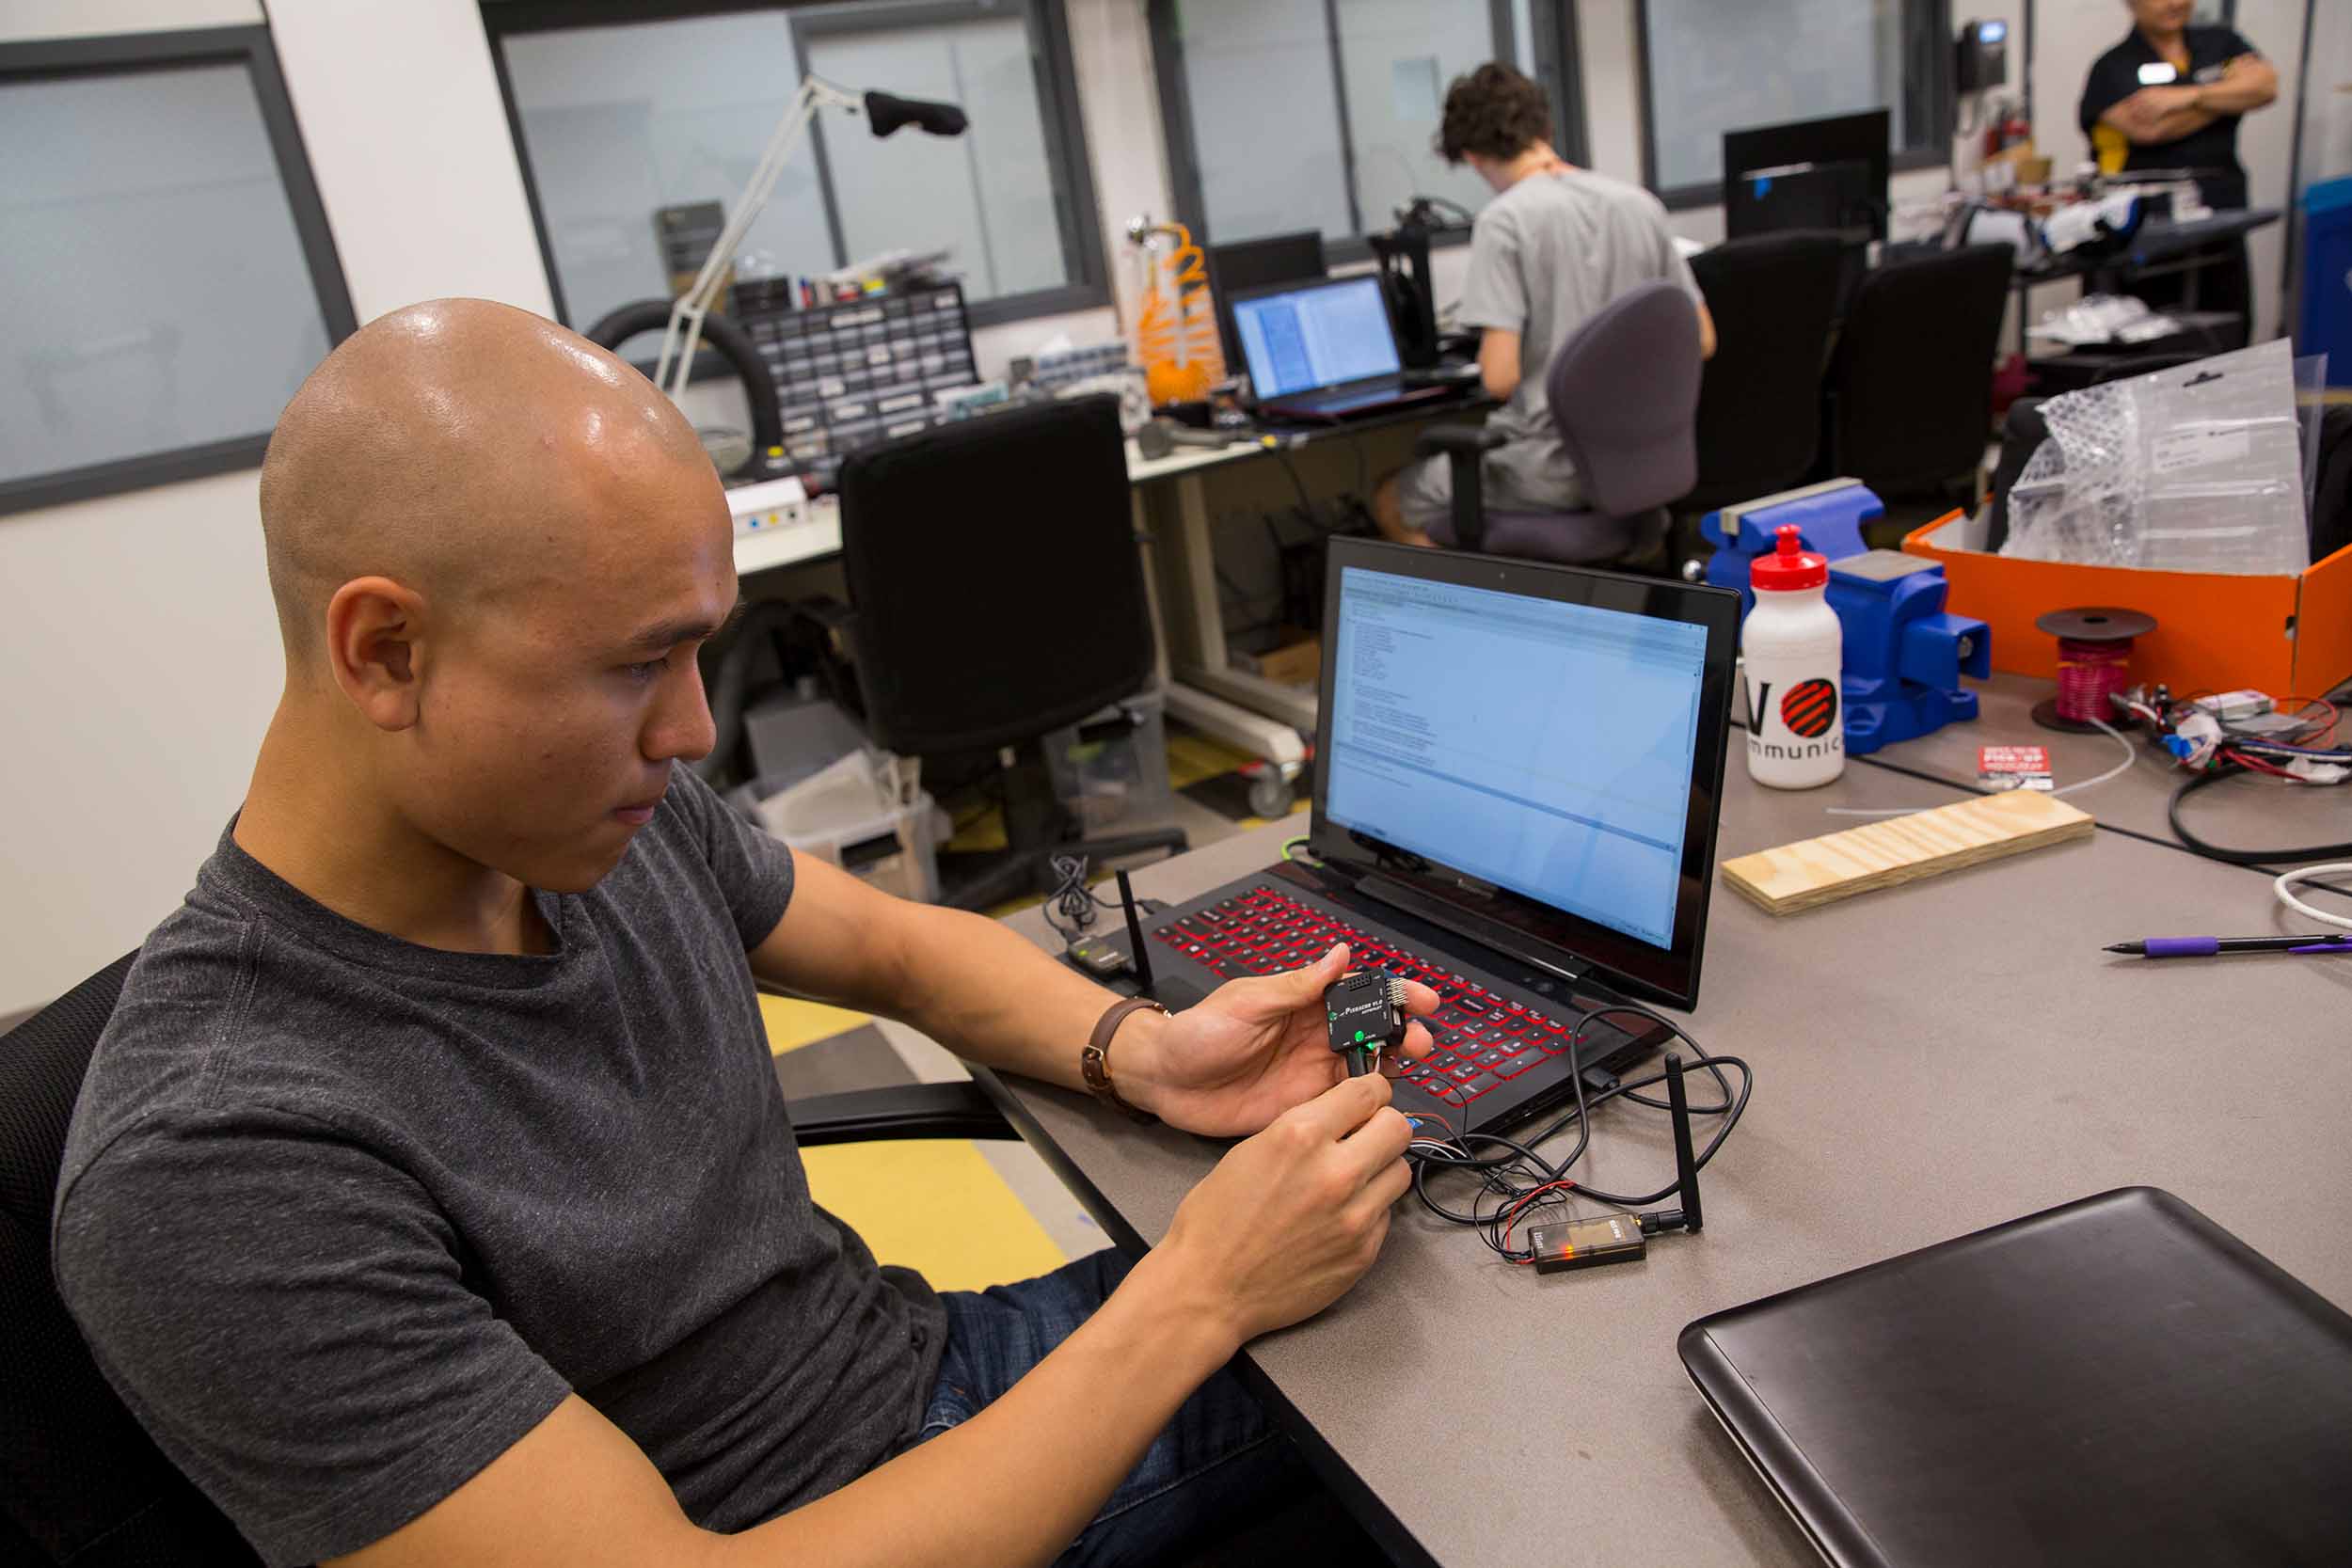 A student works on an electronic device at a laptop in a robotics research lab